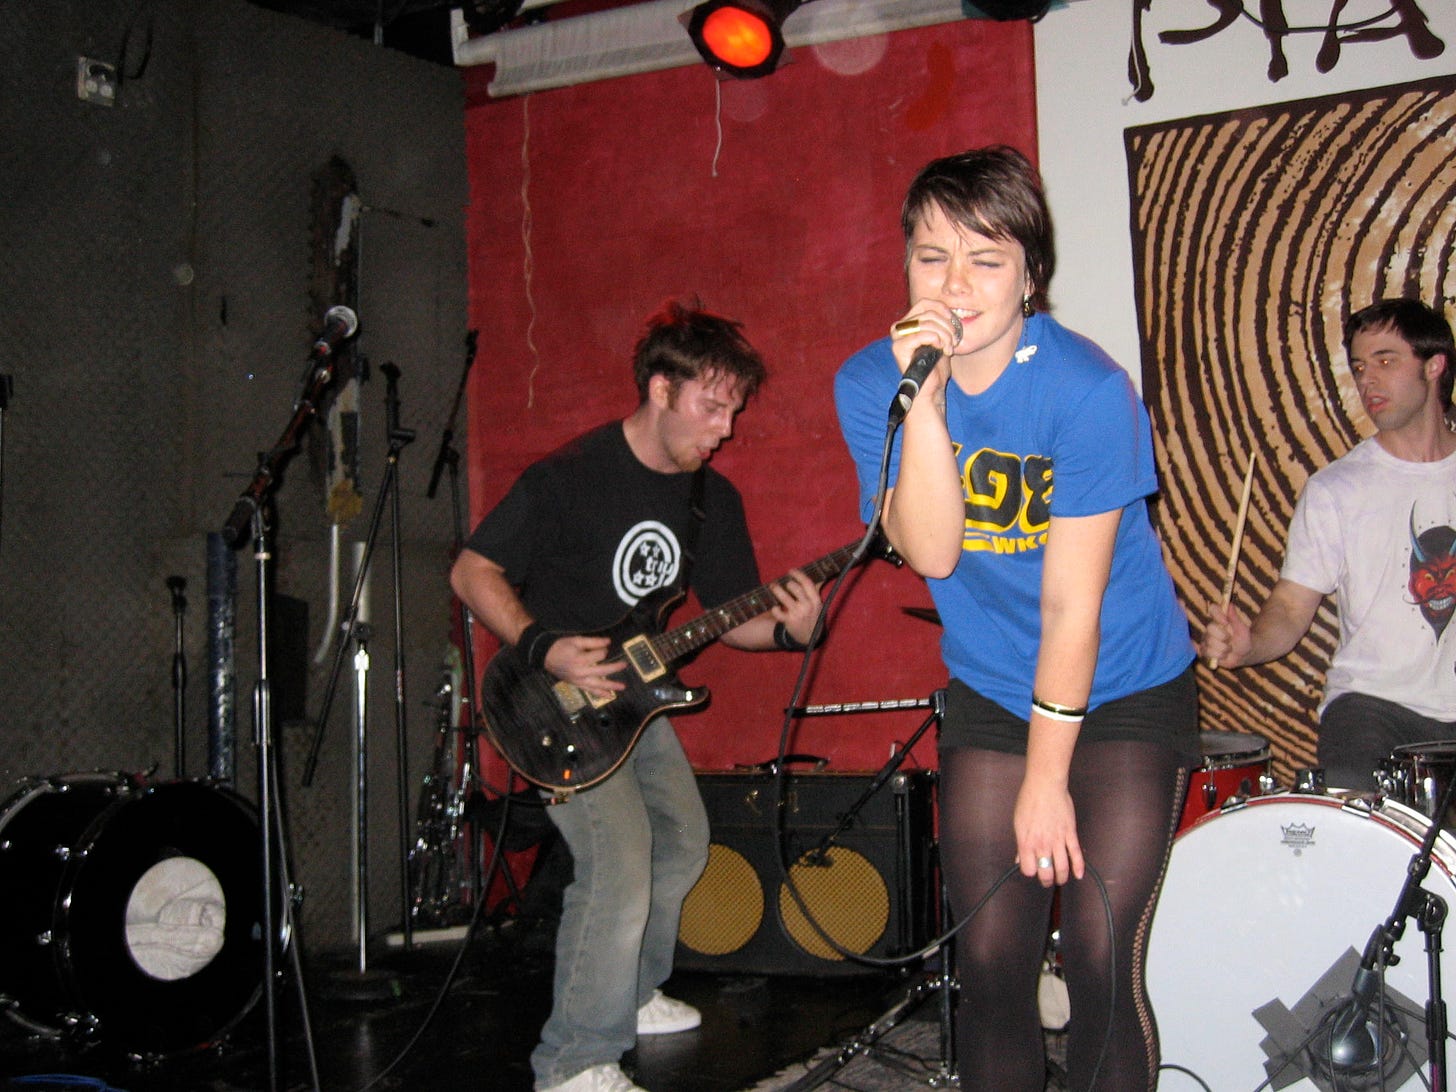 A picture of three people playing in a band.